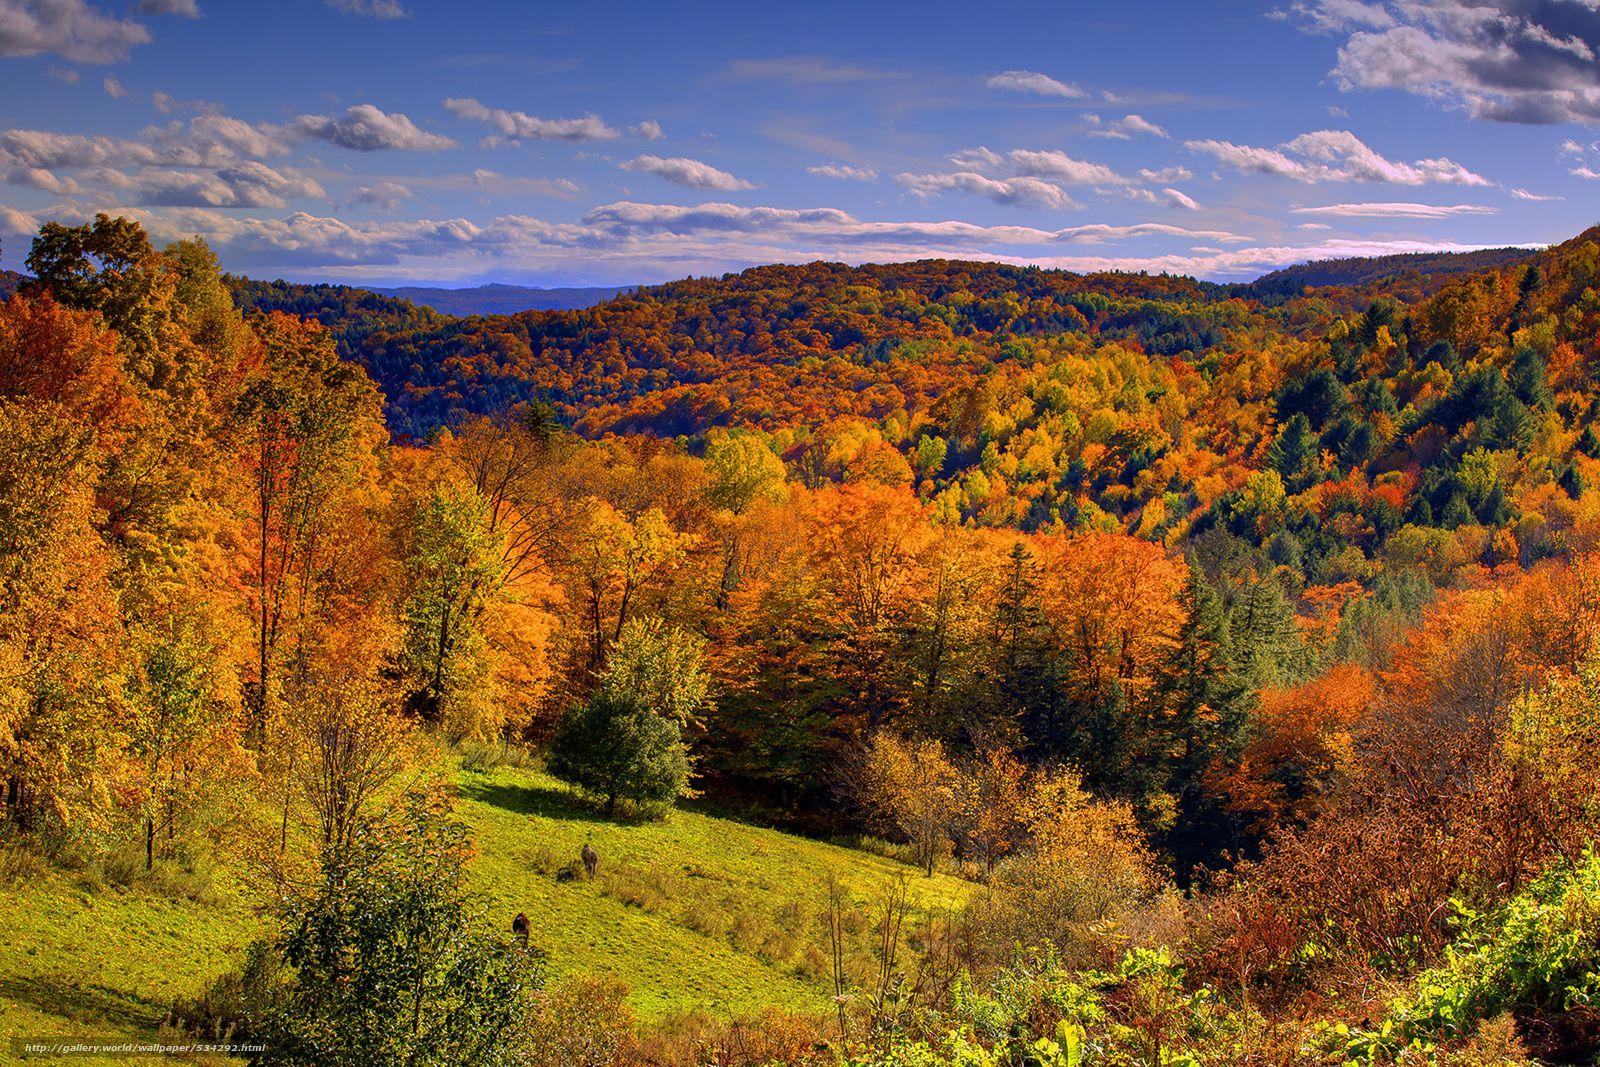 Download wallpaper valley of fall color, autumn, vermont free